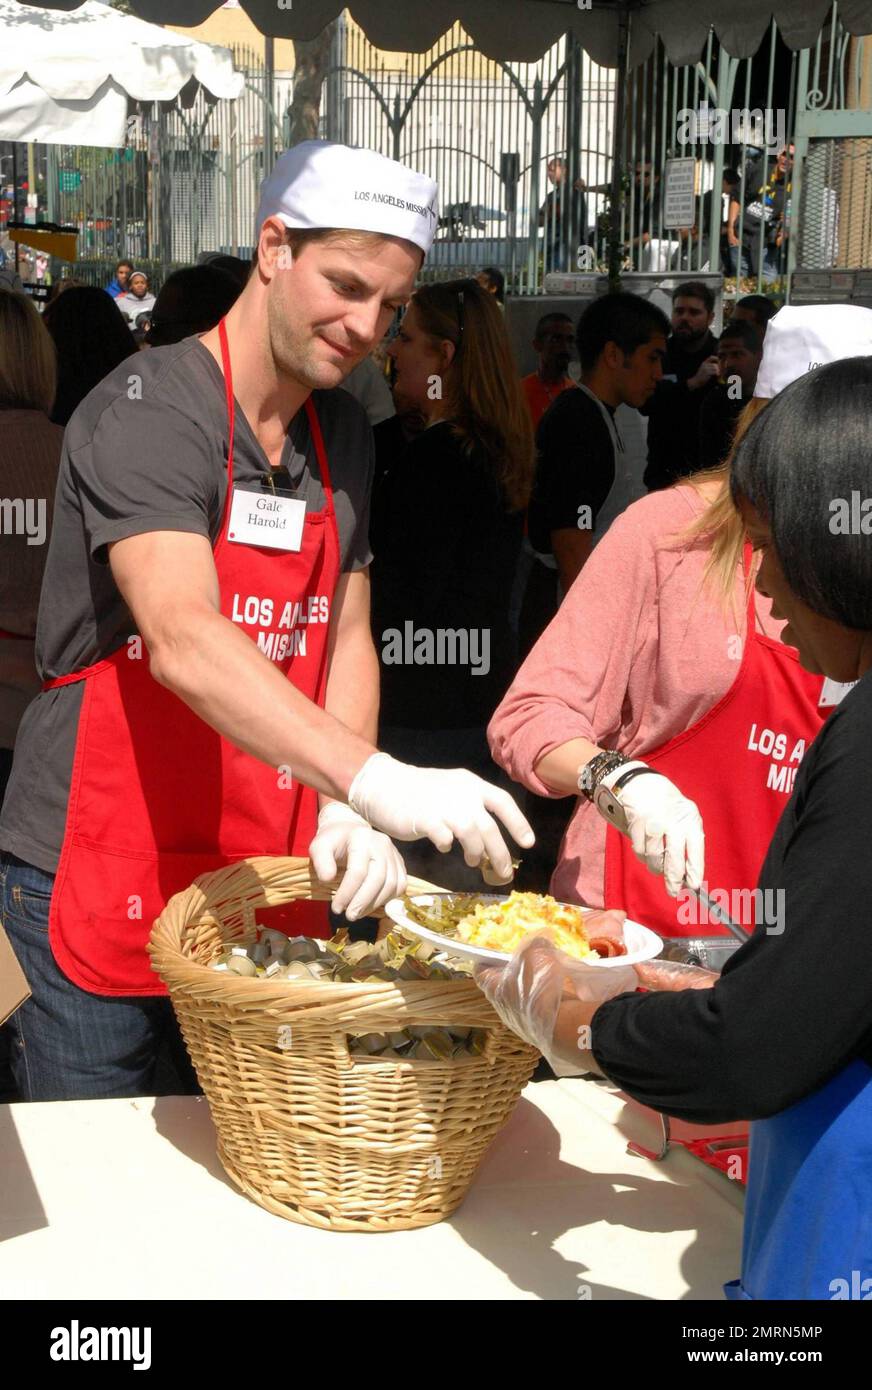 Gale Harold volunteers time for Easter at the Los Angeles (LA) Mission to help serve meals to the homeless and less fortunate, where meals, new sneakers (etnies) and toys (JAKKS Pacific) were donated in Los Angeles, CA. 4/2/10. Stock Photo